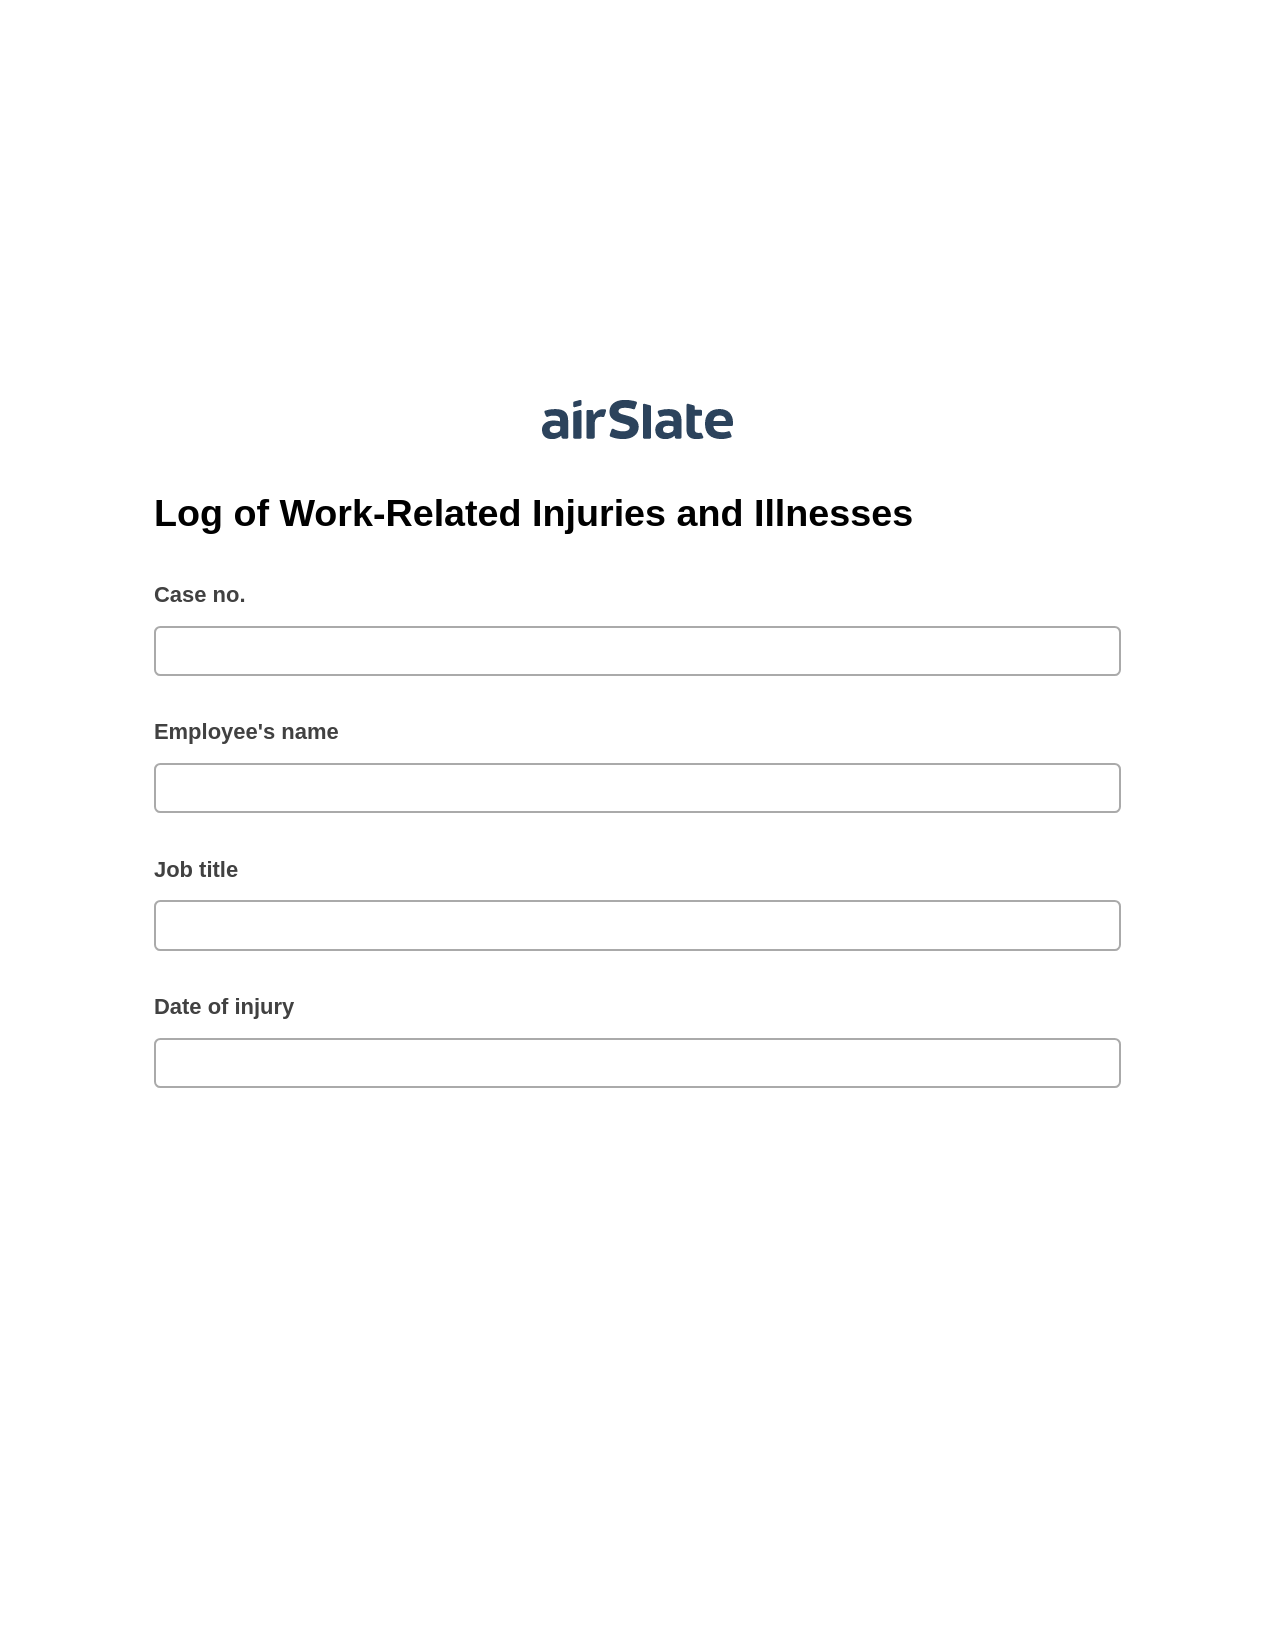 Log of Work-Related Injuries and Illnesses Pre-fill from Google Sheets Bot, Lock the slate bot, Export to Formstack Documents Bot